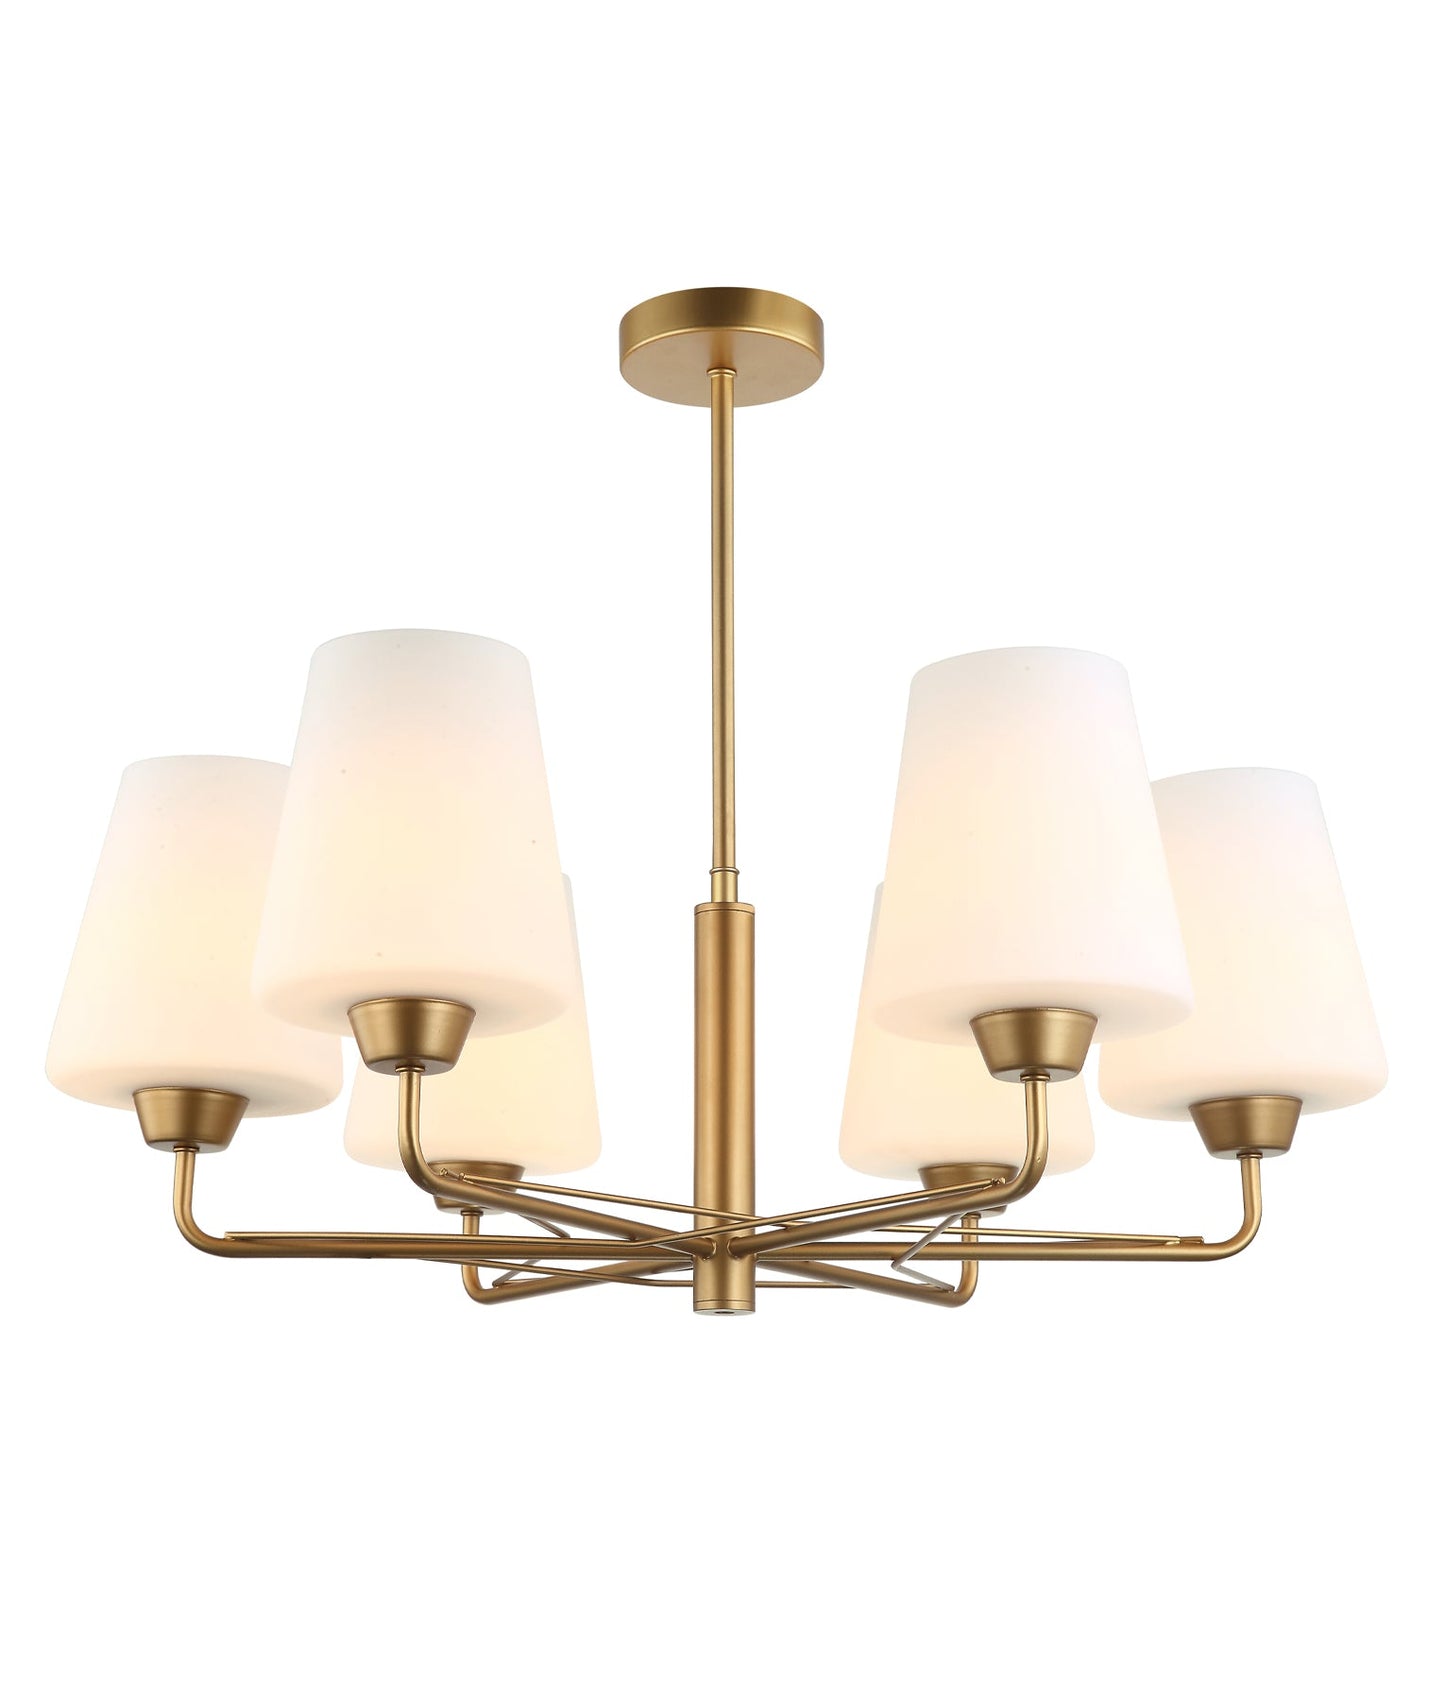 ABBEY: Interior Traditional 6 Lamps Opal Glass Pendant Lights